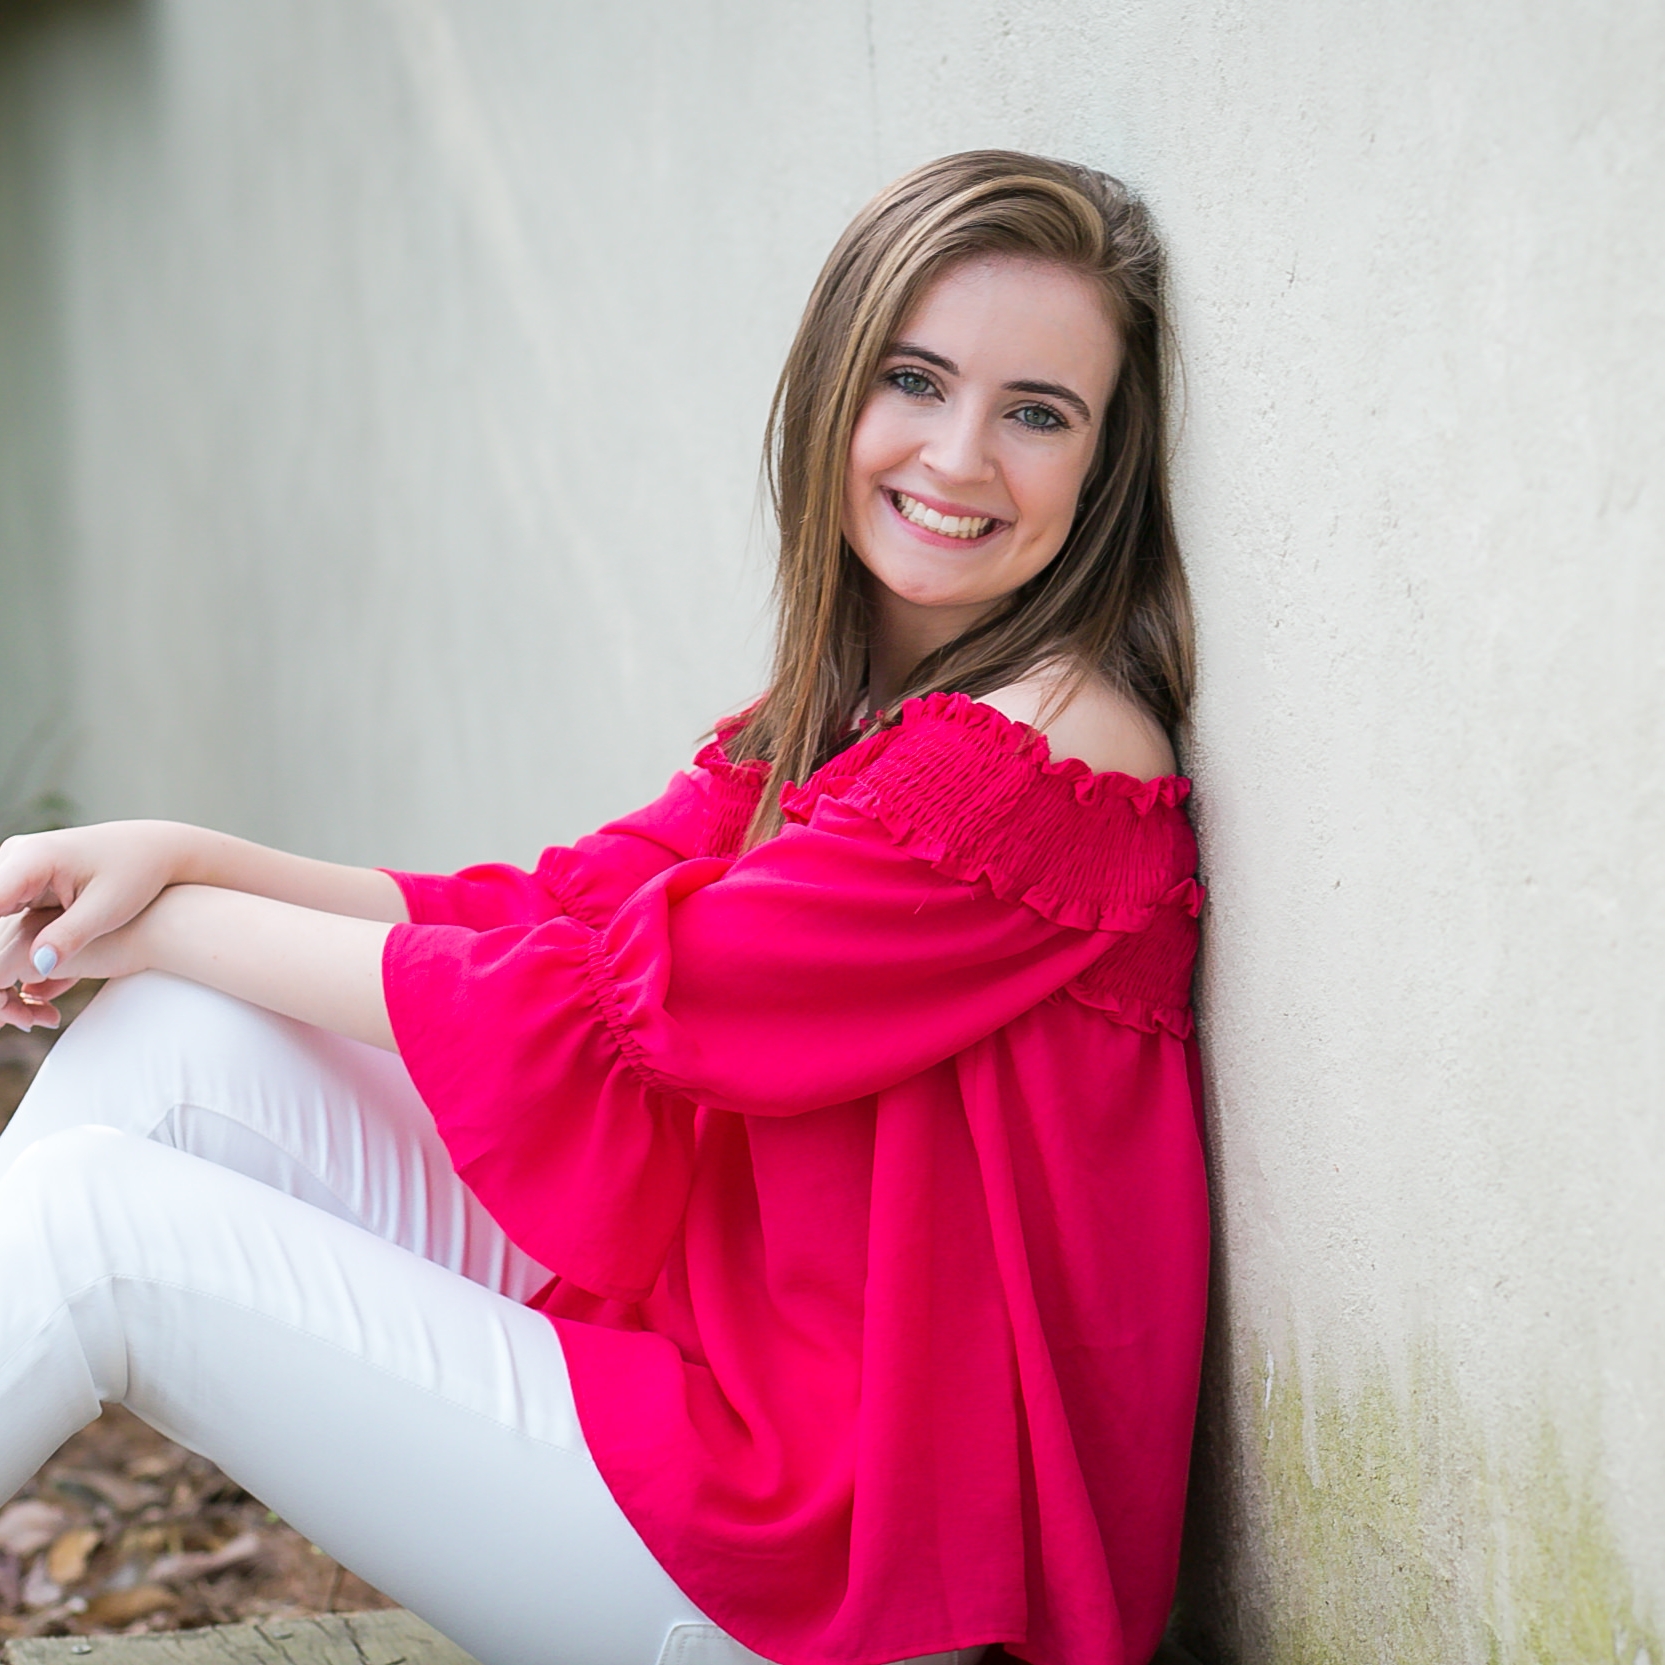 Thank you again for taking such amazing senior pictures – we love them all! I had so much fun during the whole process!